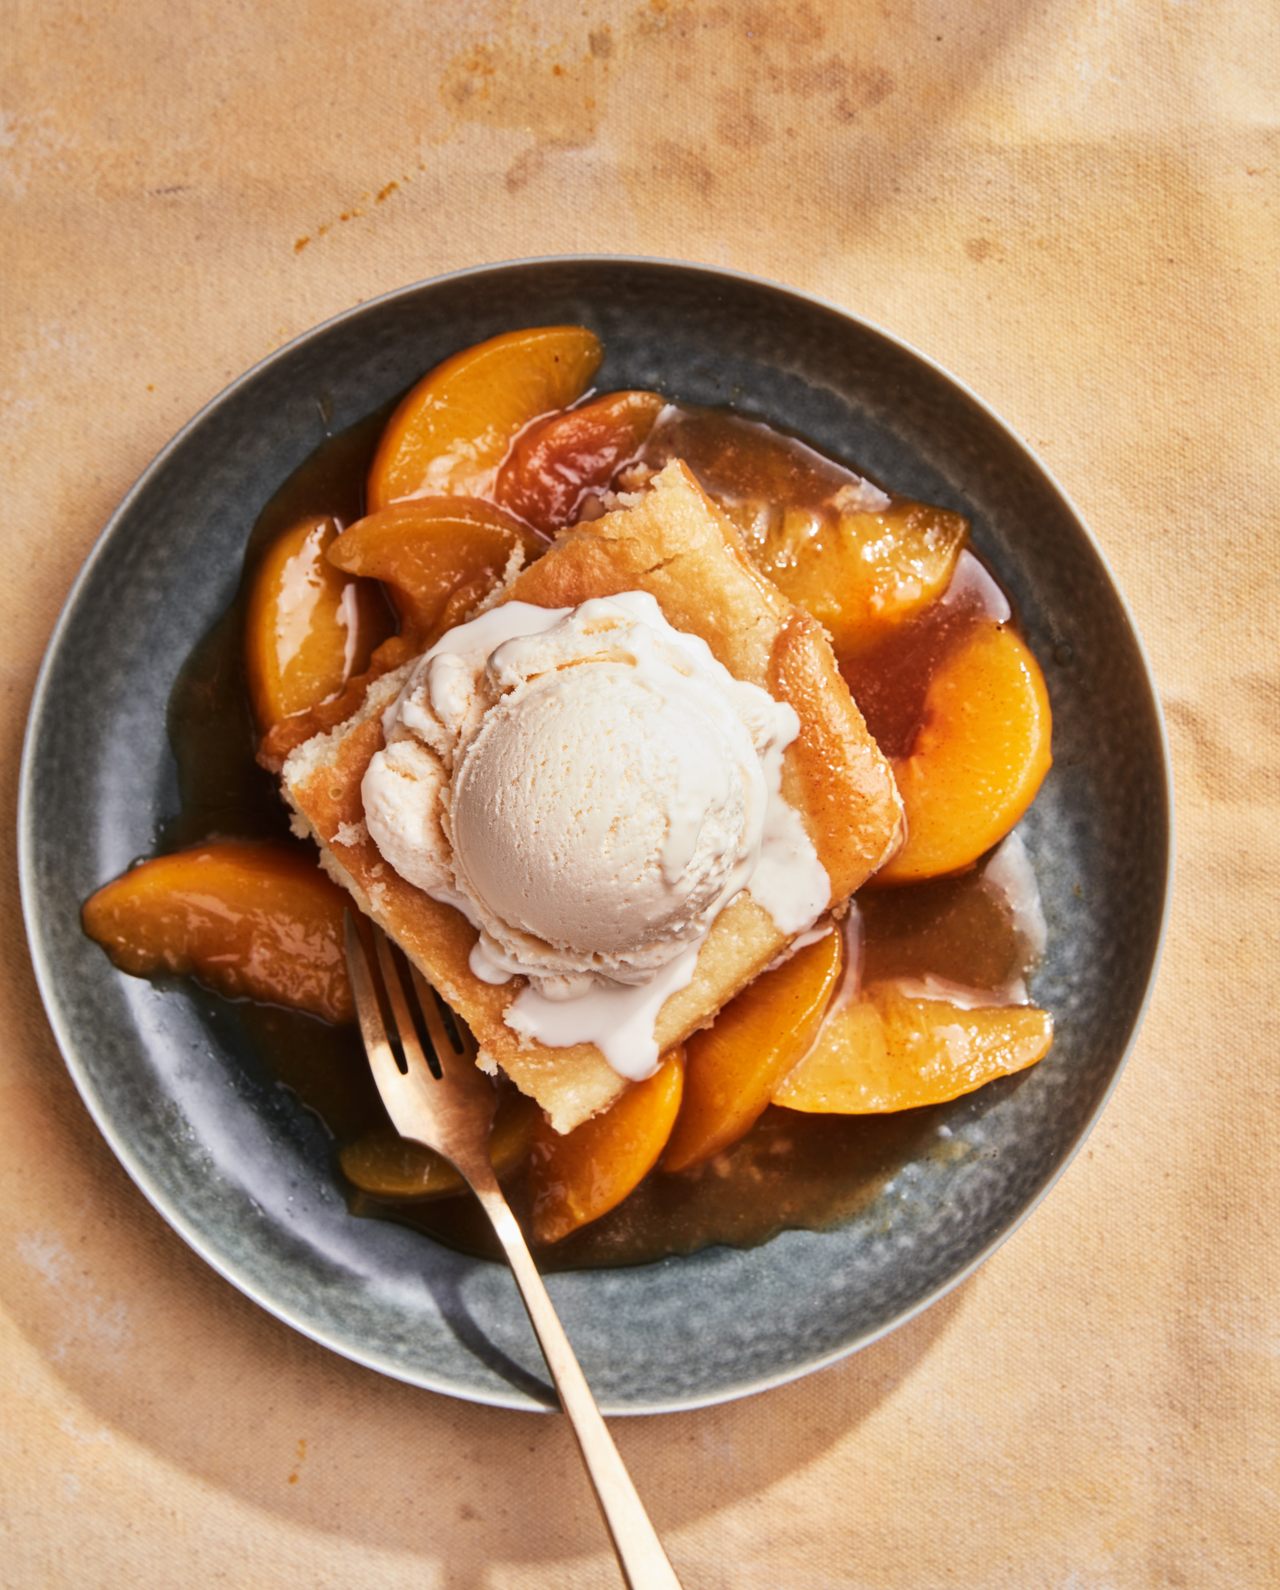 Chris Scott writes that peach cobbler figured in his "happiest food memories," just as it does for many Southern children. 